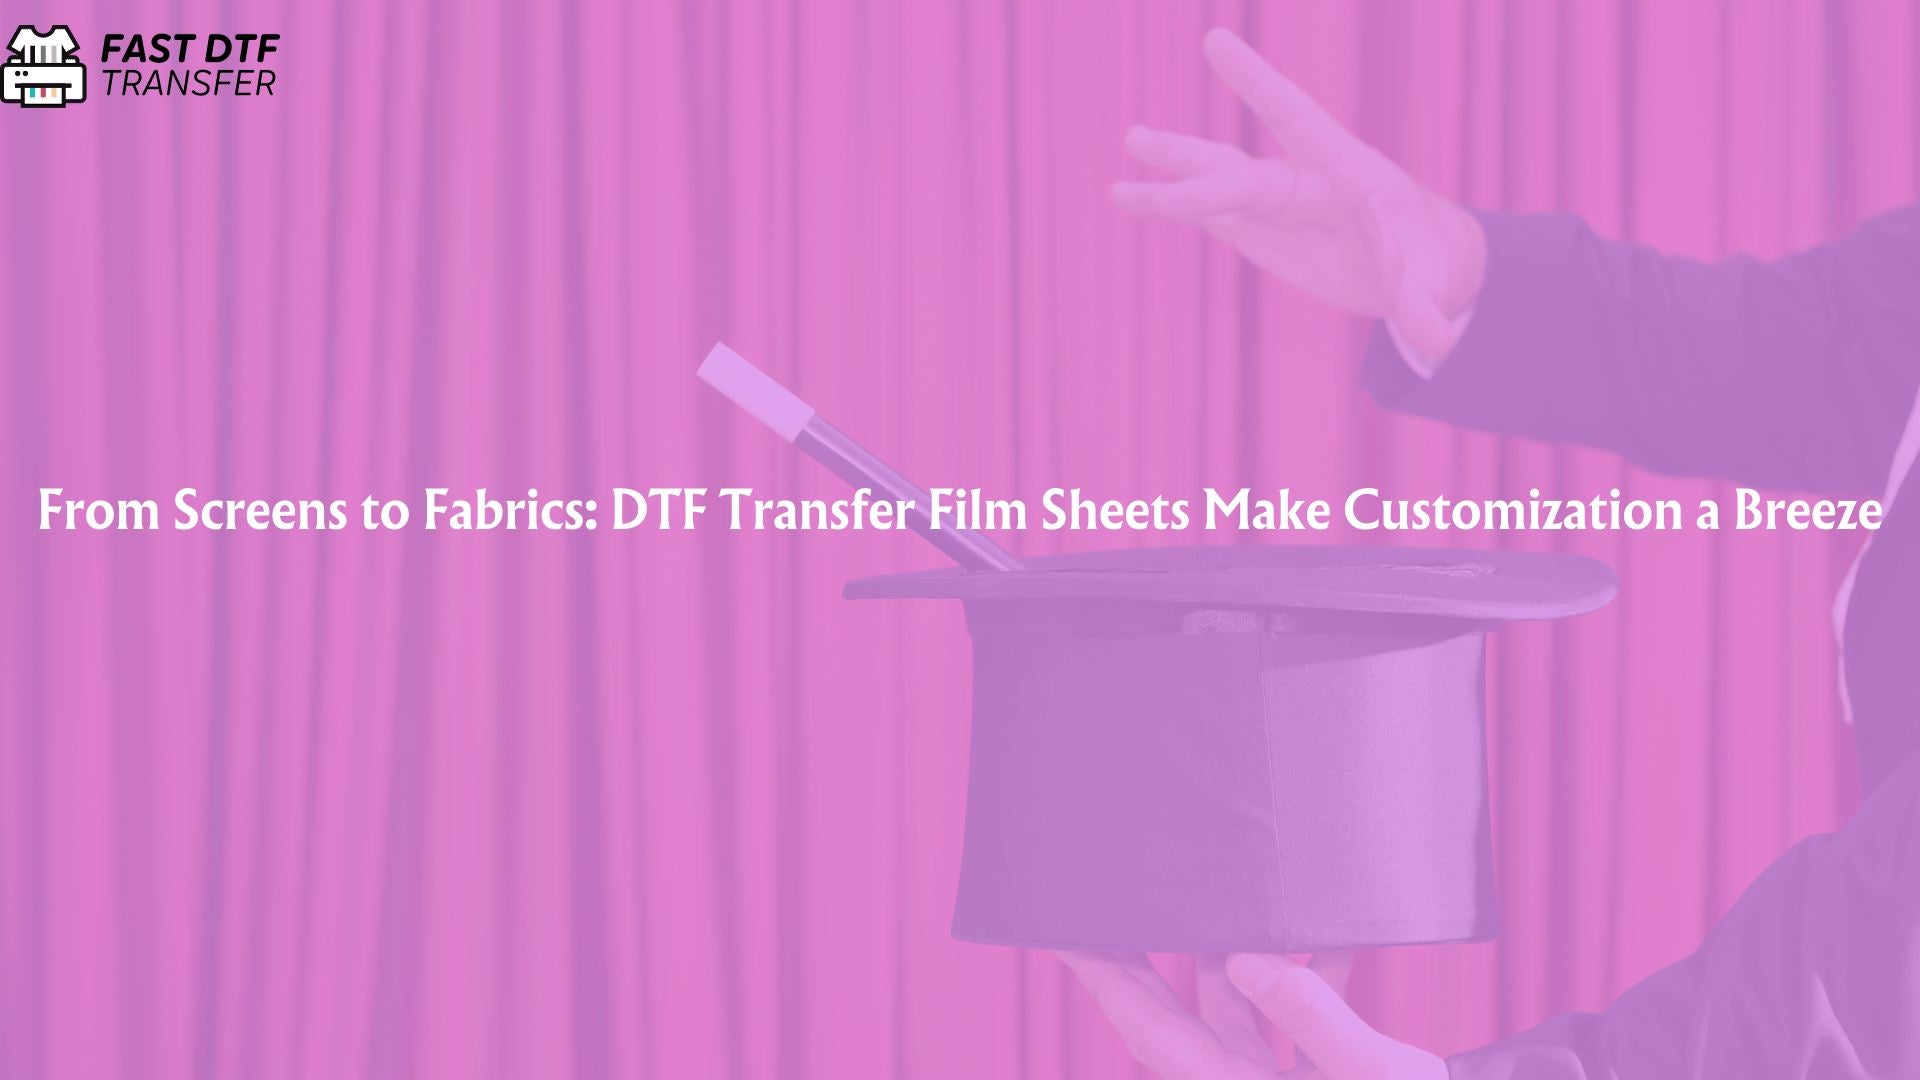 From Screens to Fabrics: DTF Transfer Film Sheets Make Customization a Breeze